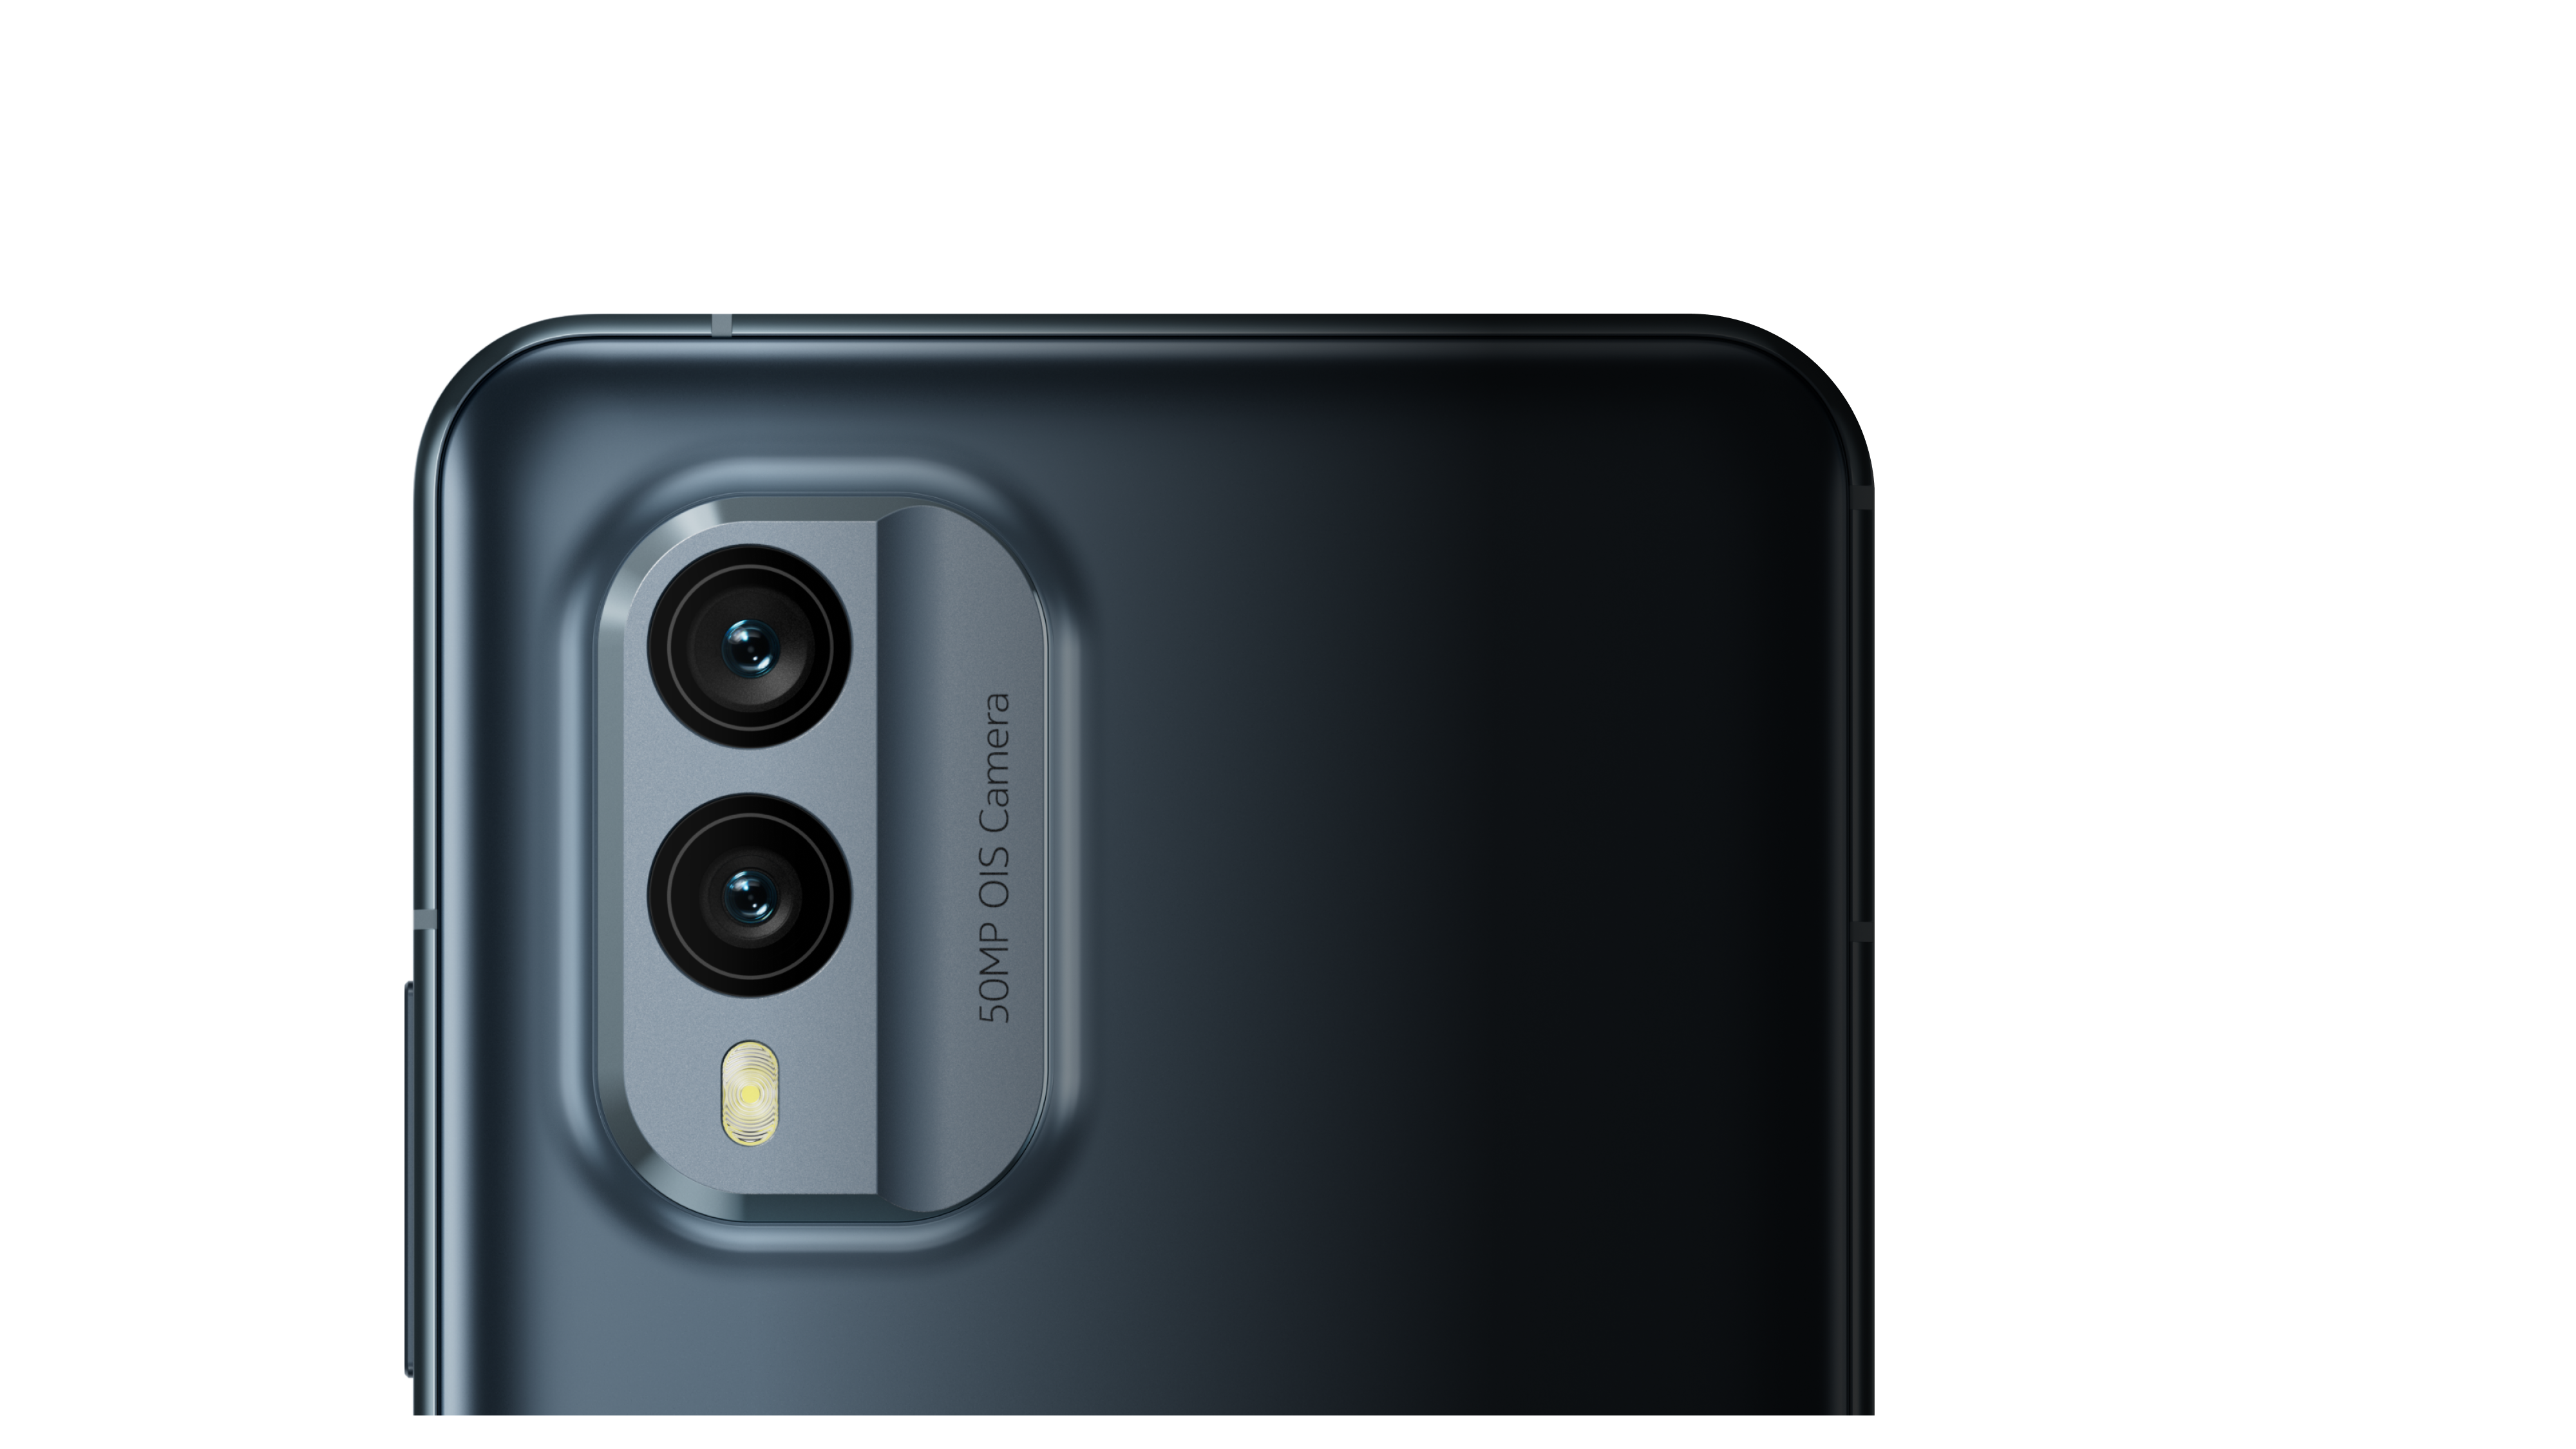 Nokia X30 smartphone OIS 5G camera sustainable with